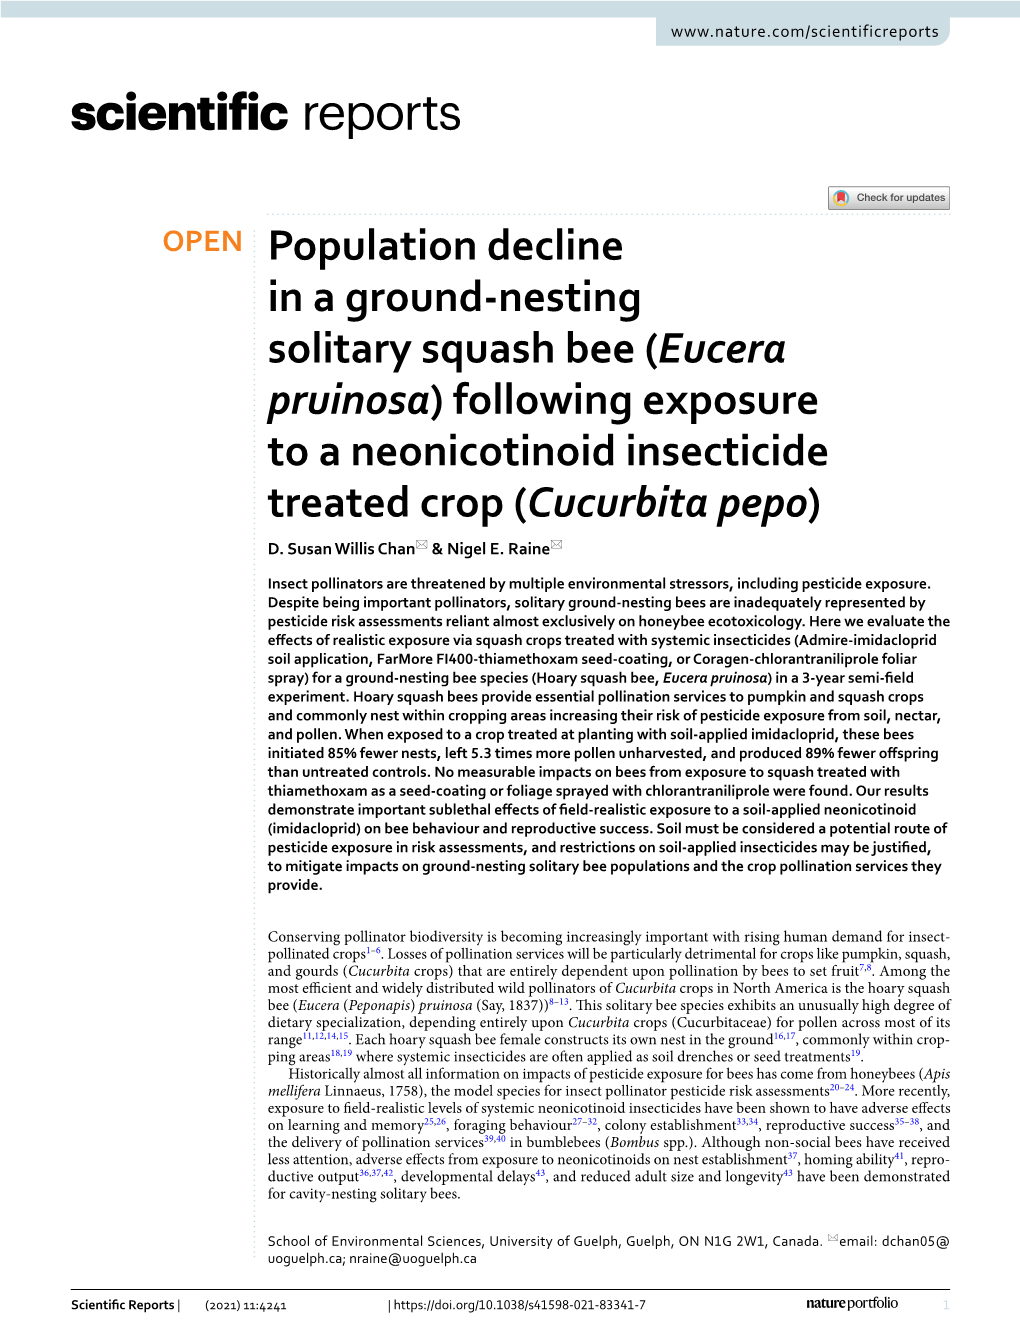 Population Decline in a Ground-Nesting Solitary Squash